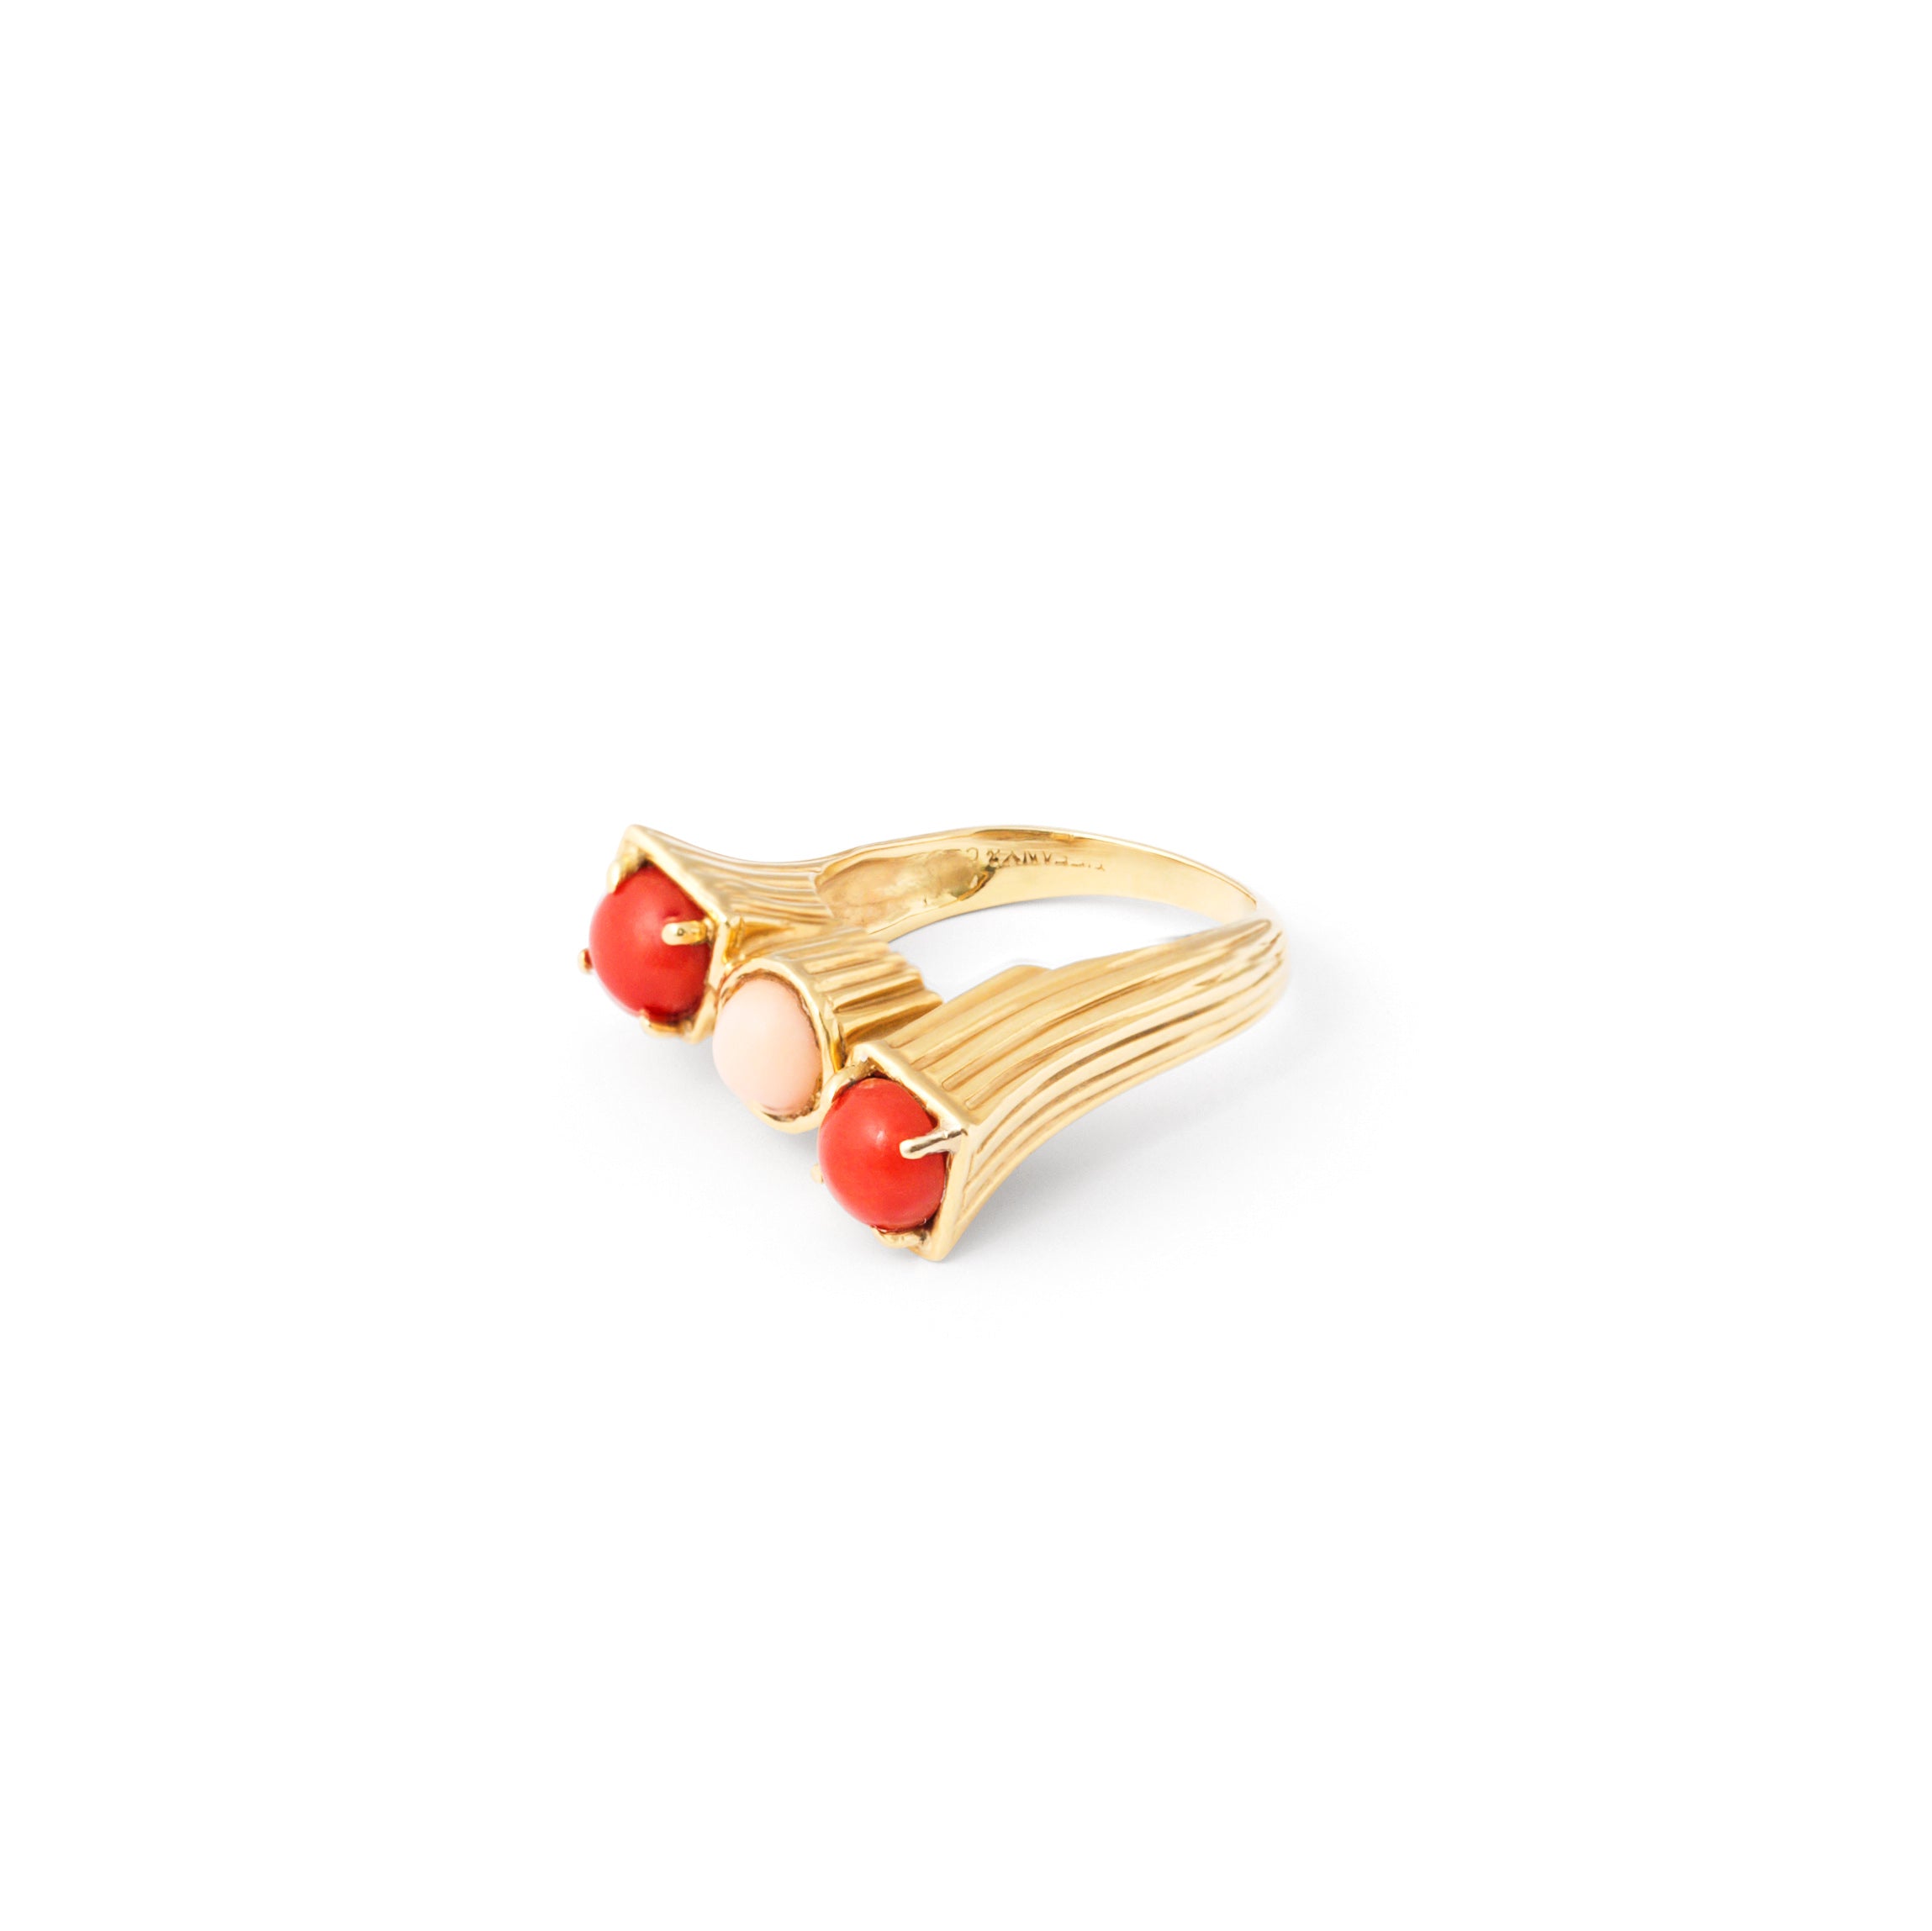 Tiffany & Co. Coral and 18k Gold Ring